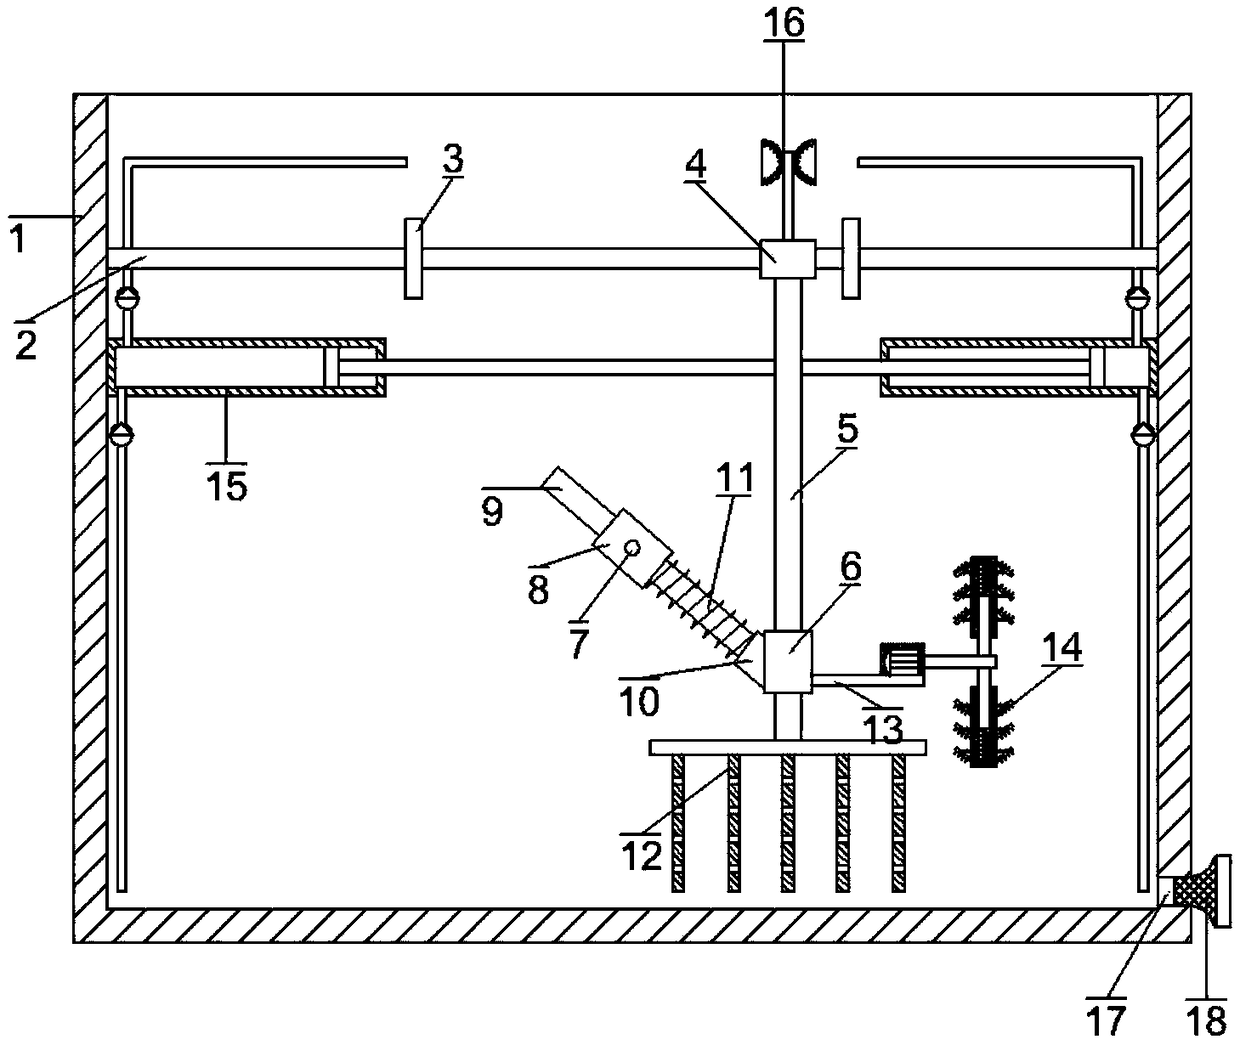 Device for mixing and stirring liquid materials